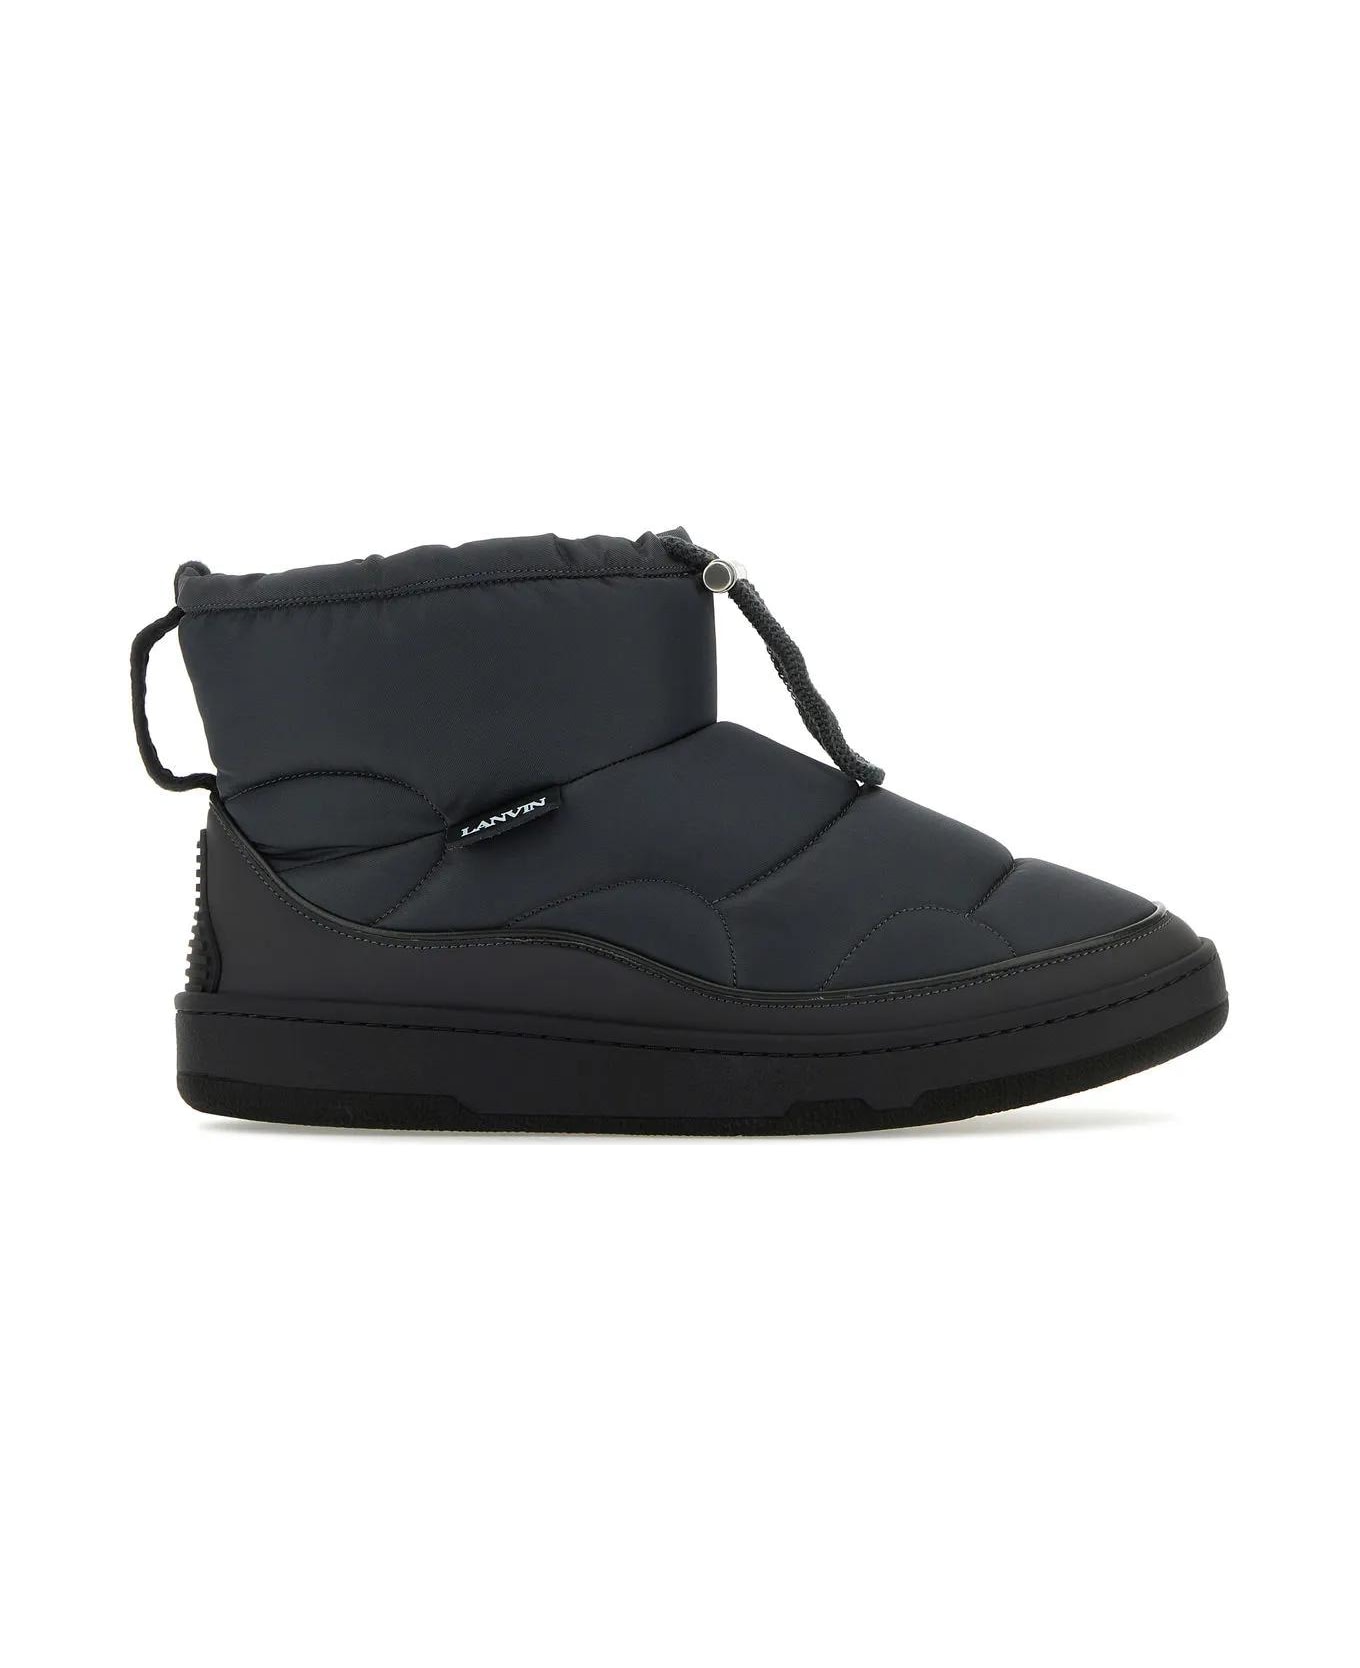 Lanvin Graphite Fabric Curb Snow Ankle Boots - GREY スニーカー